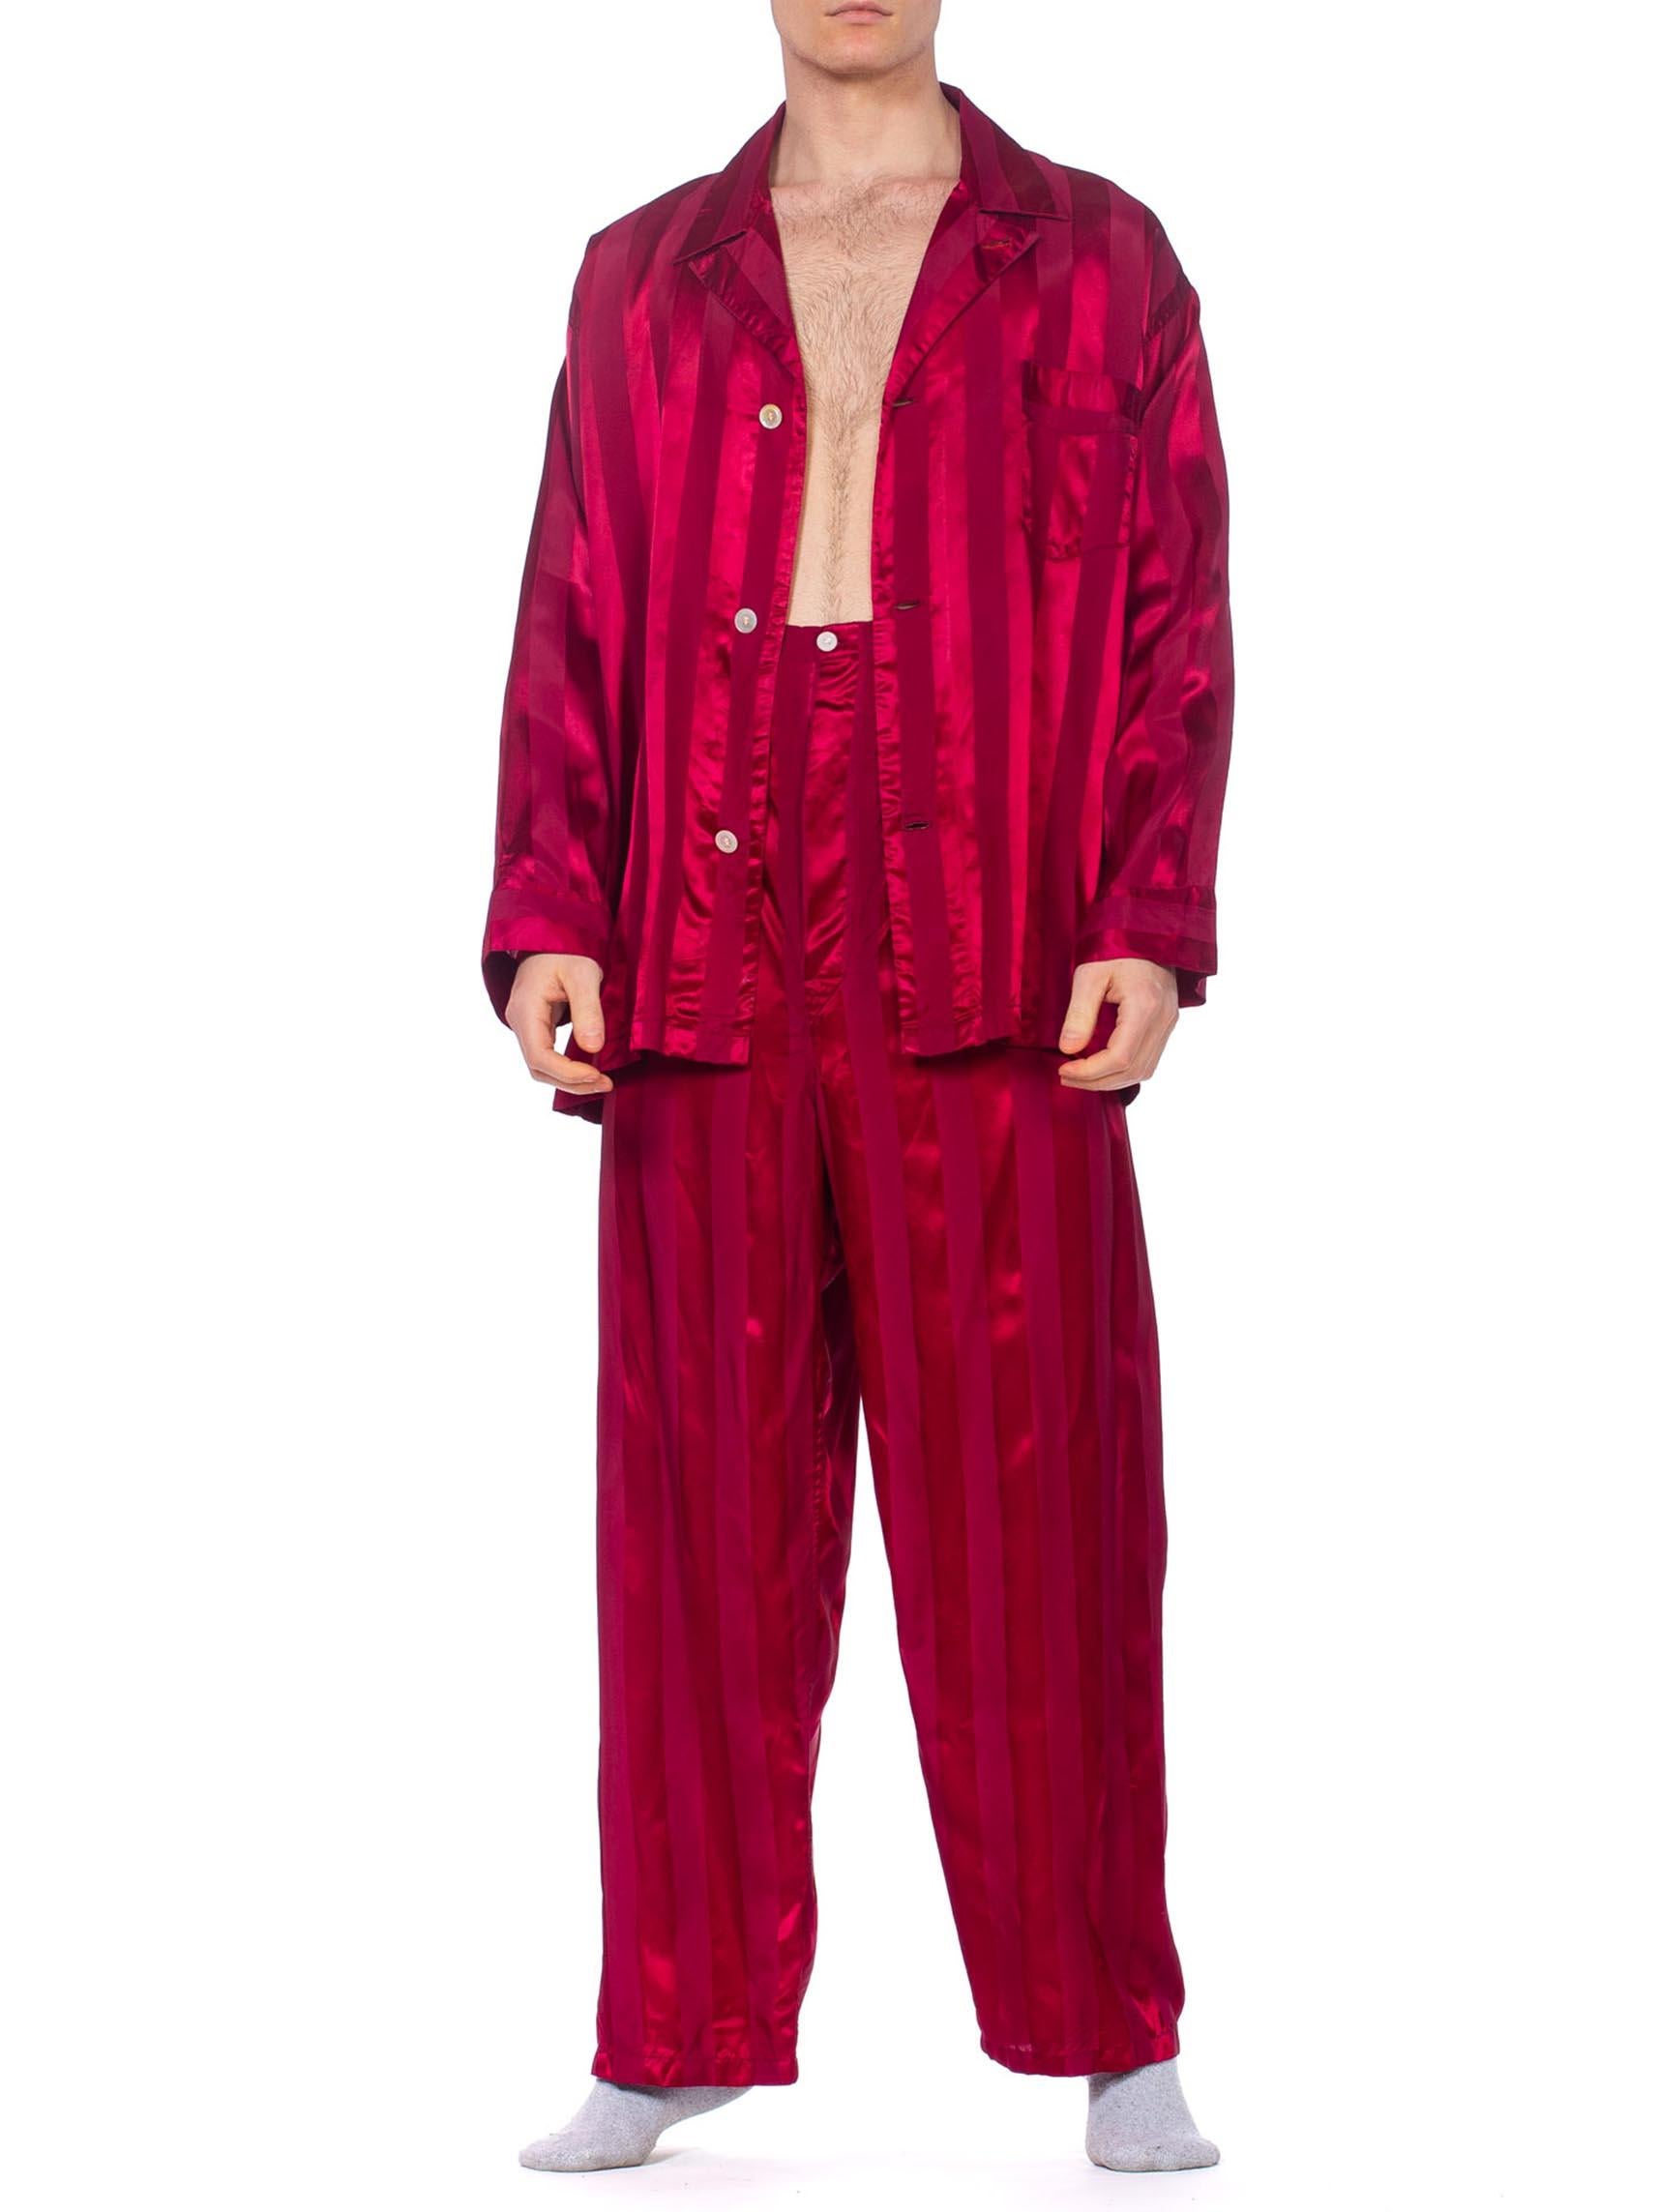 Pants have elastic sides and adjustable buttons to allow for several sizes from 34 up to 42 waist. 1940S Maroon Rayon Men's Satin Stripe Pajamas Large Size